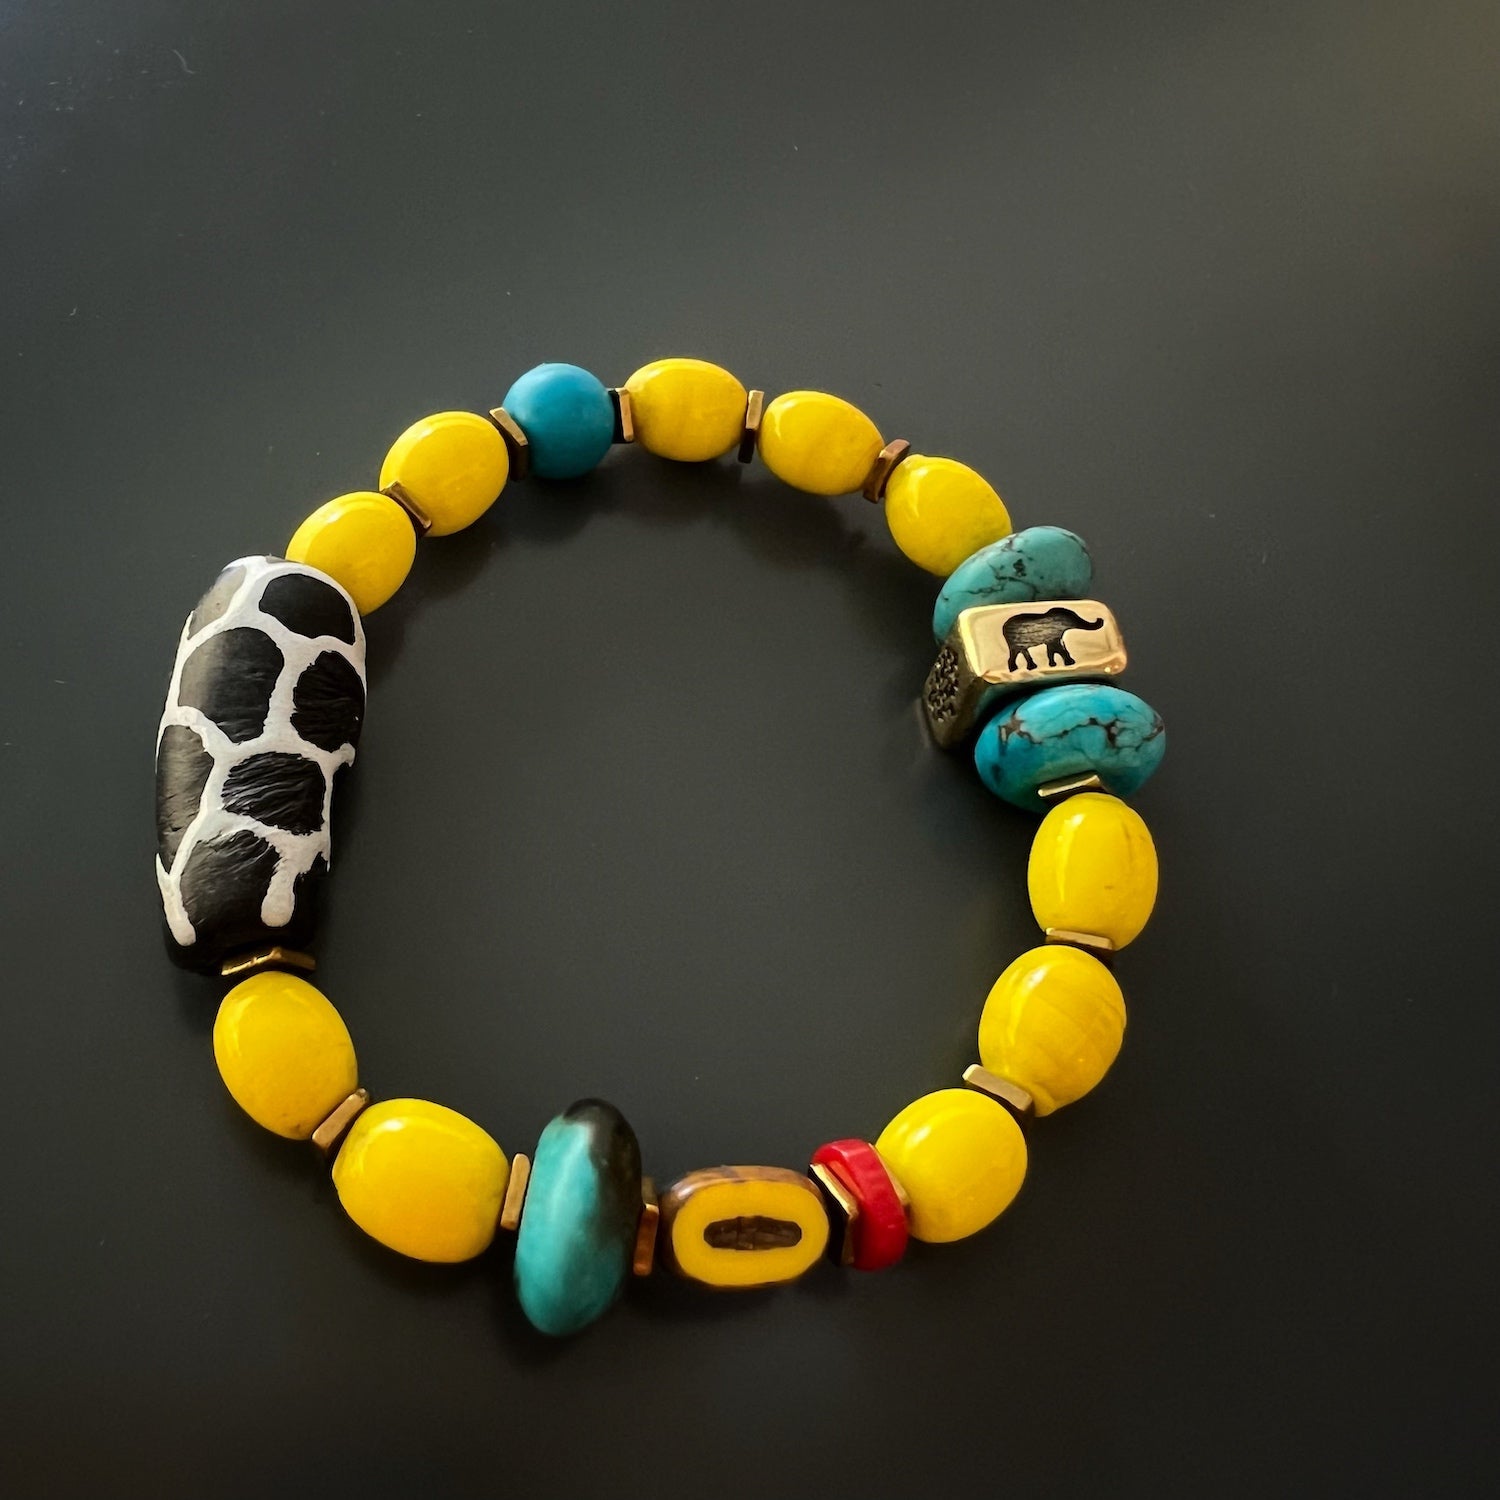 Top-down view of the Happiness Symbol Yellow Bracelet, displaying the beautiful arrangement of the yellow African color beads, the turquoise stone beads, and the unique ceramic beads, creating a joyful and eye-catching design.